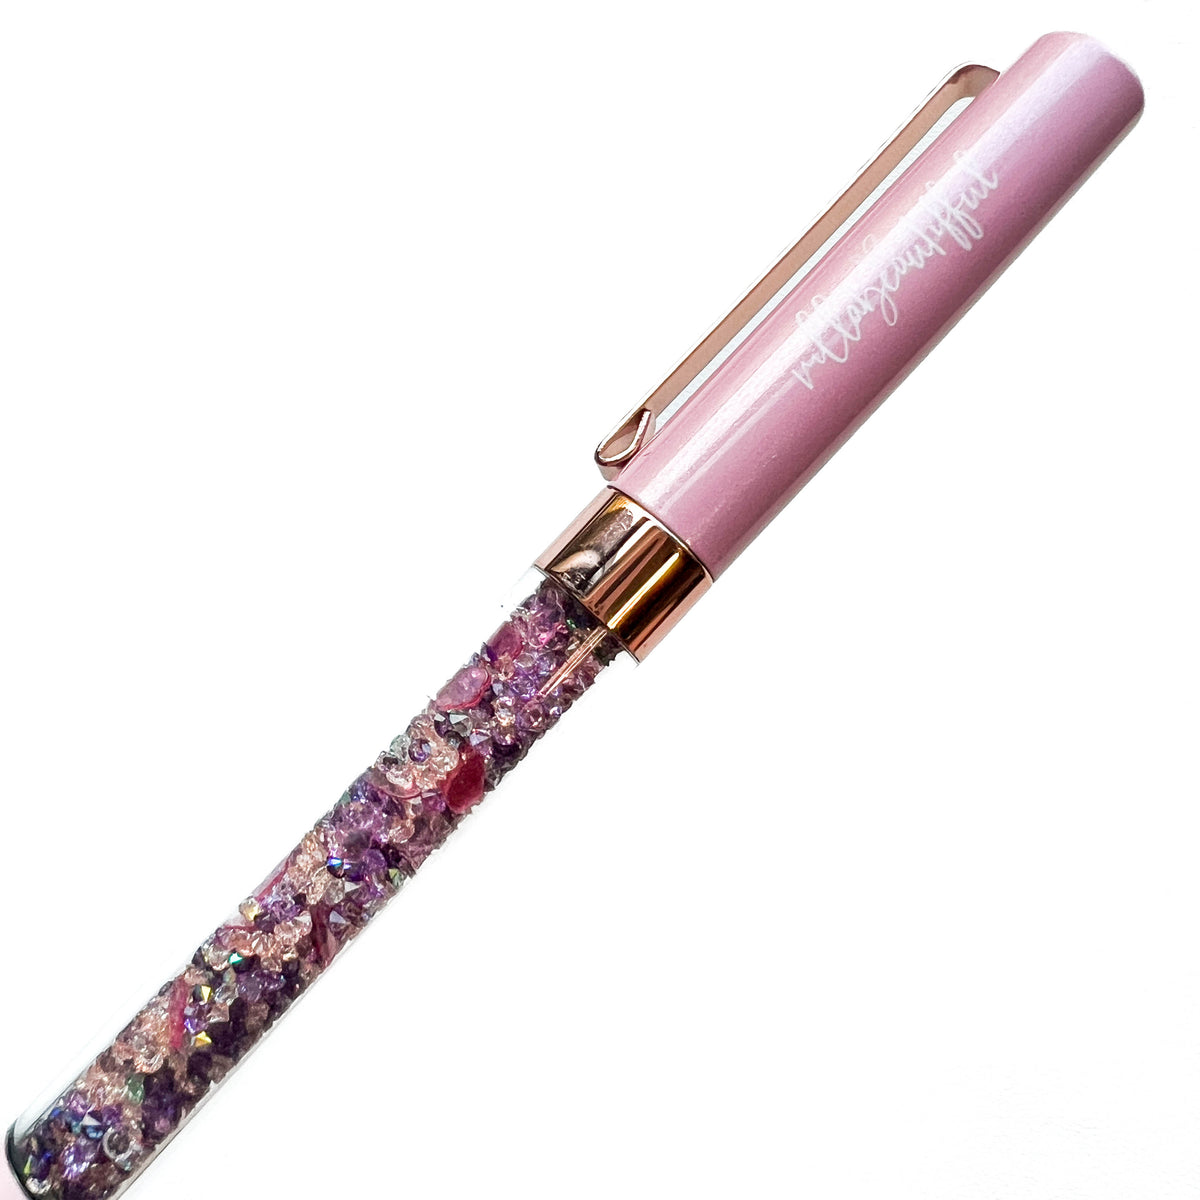 Pink Clouds Crystal VBPen | limited pen